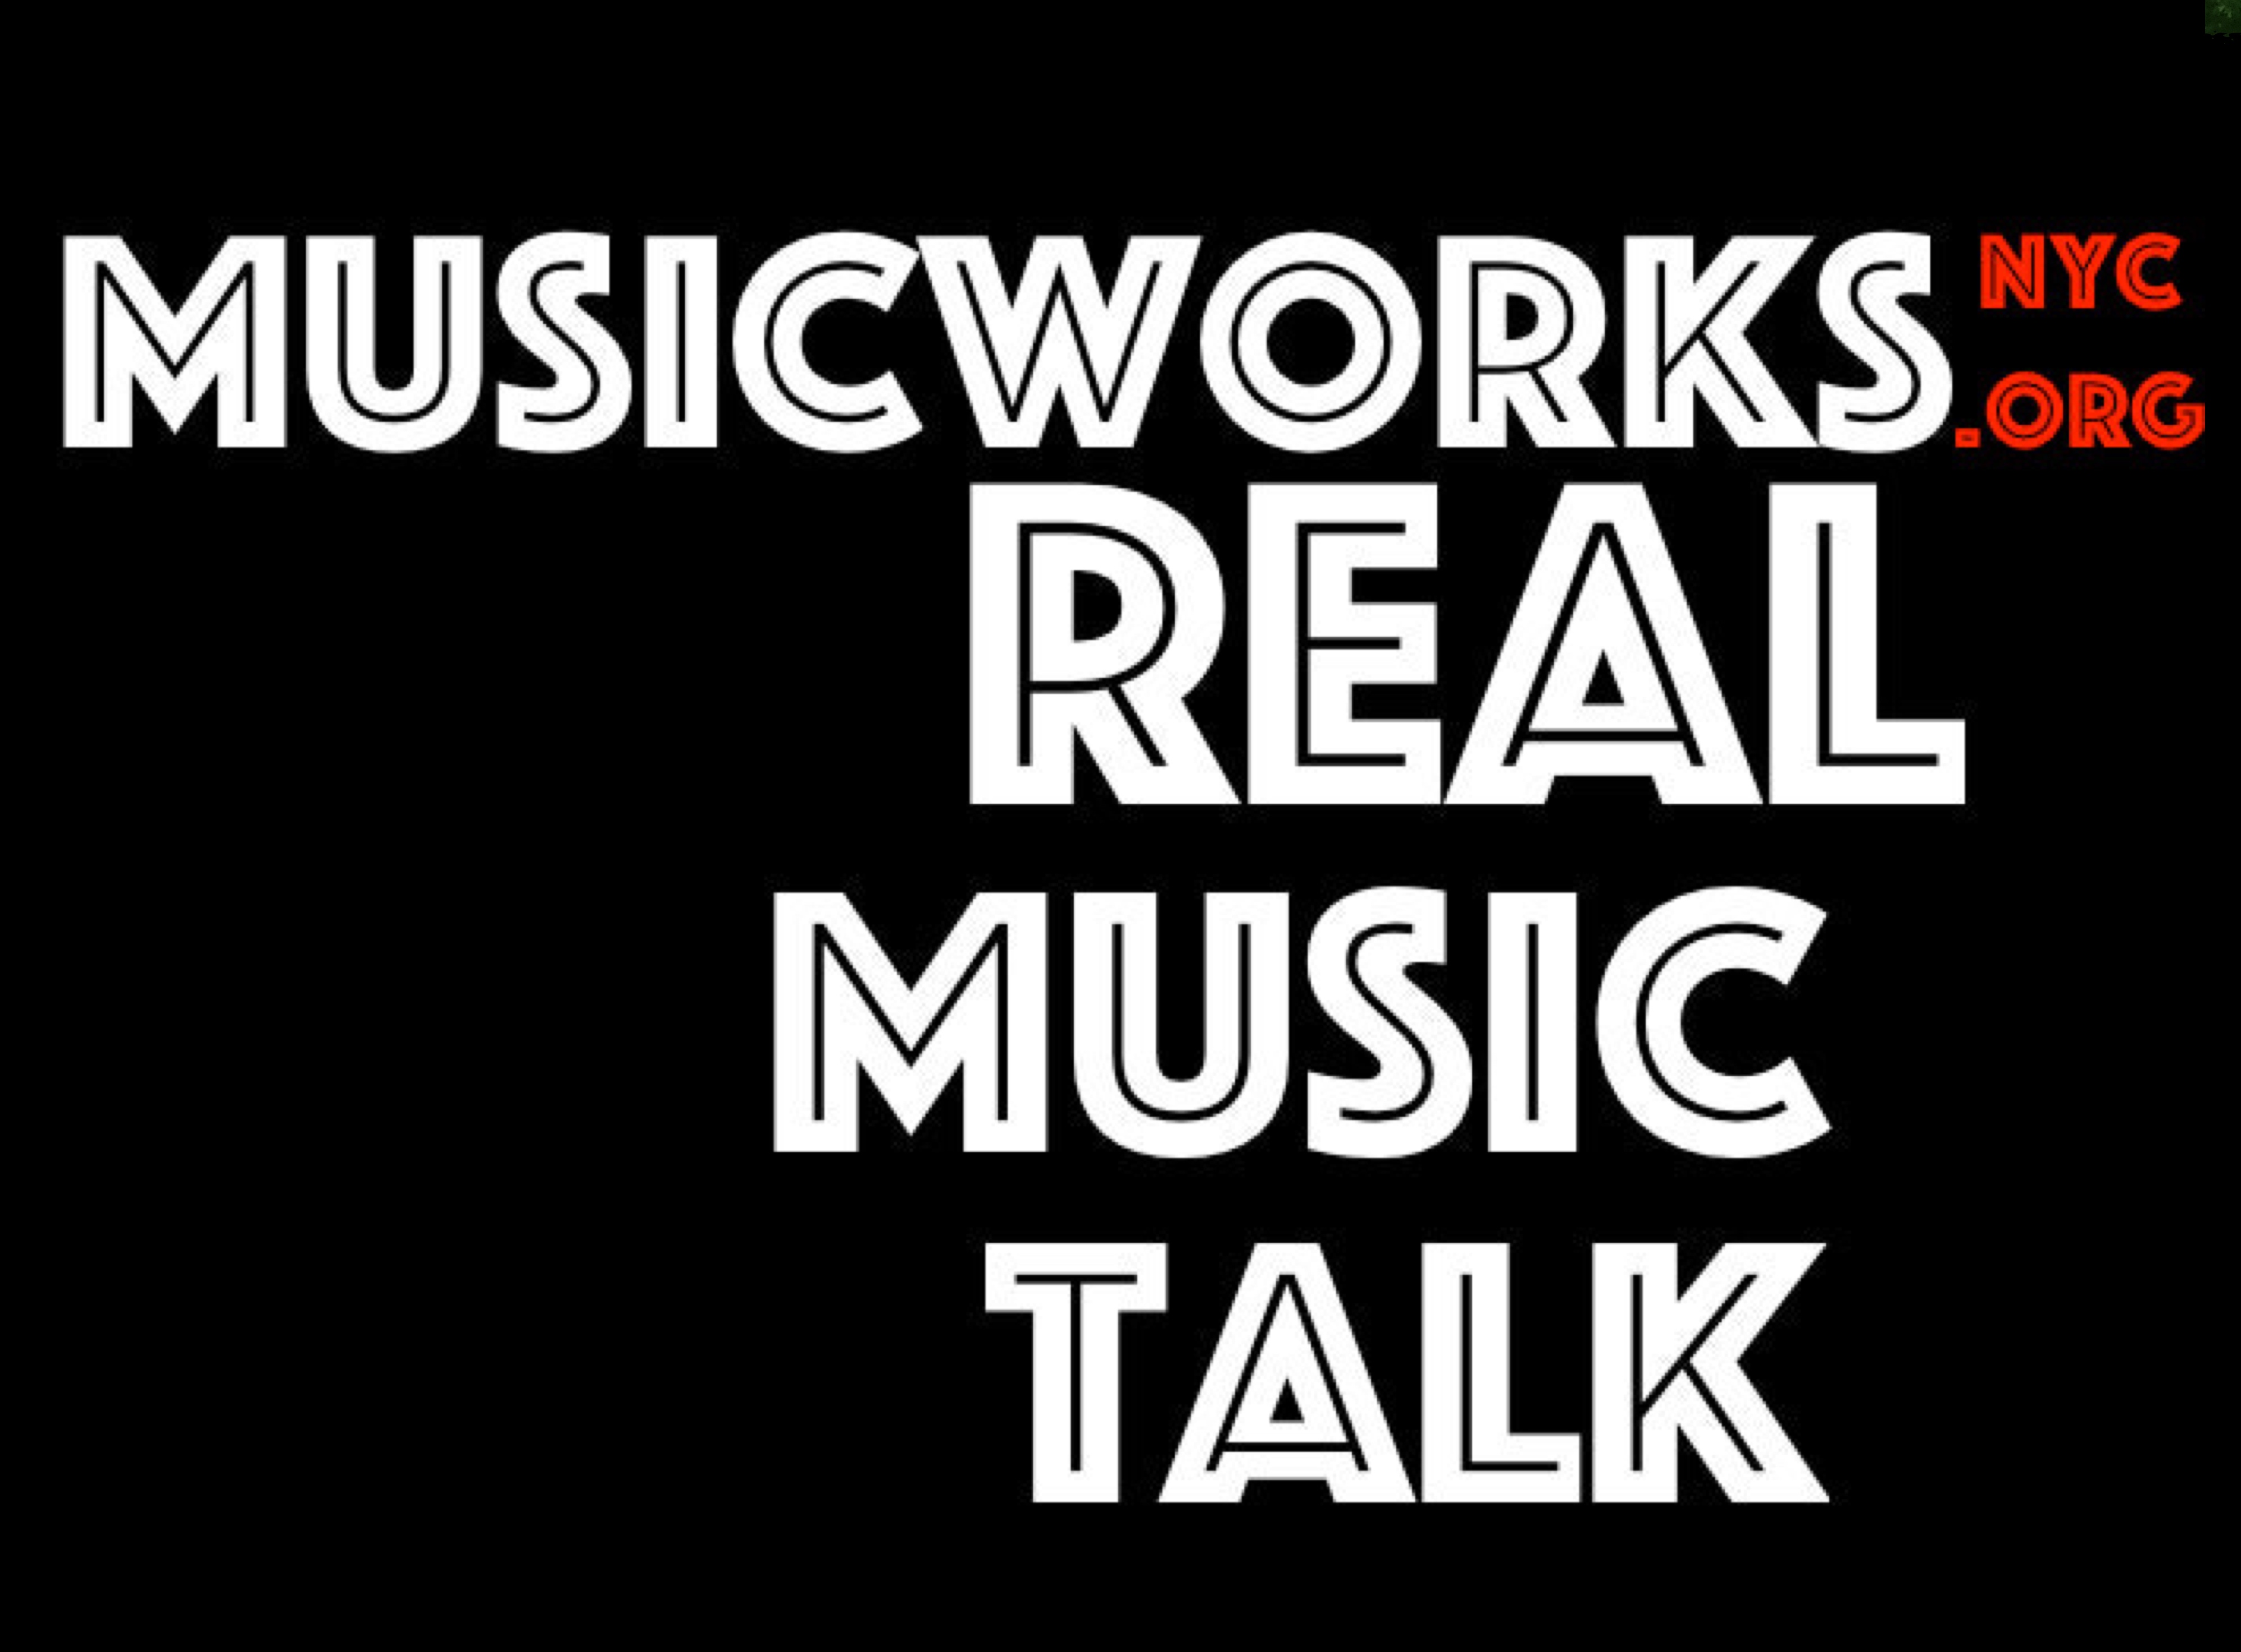 Real Music Talk with MusicworksNYC